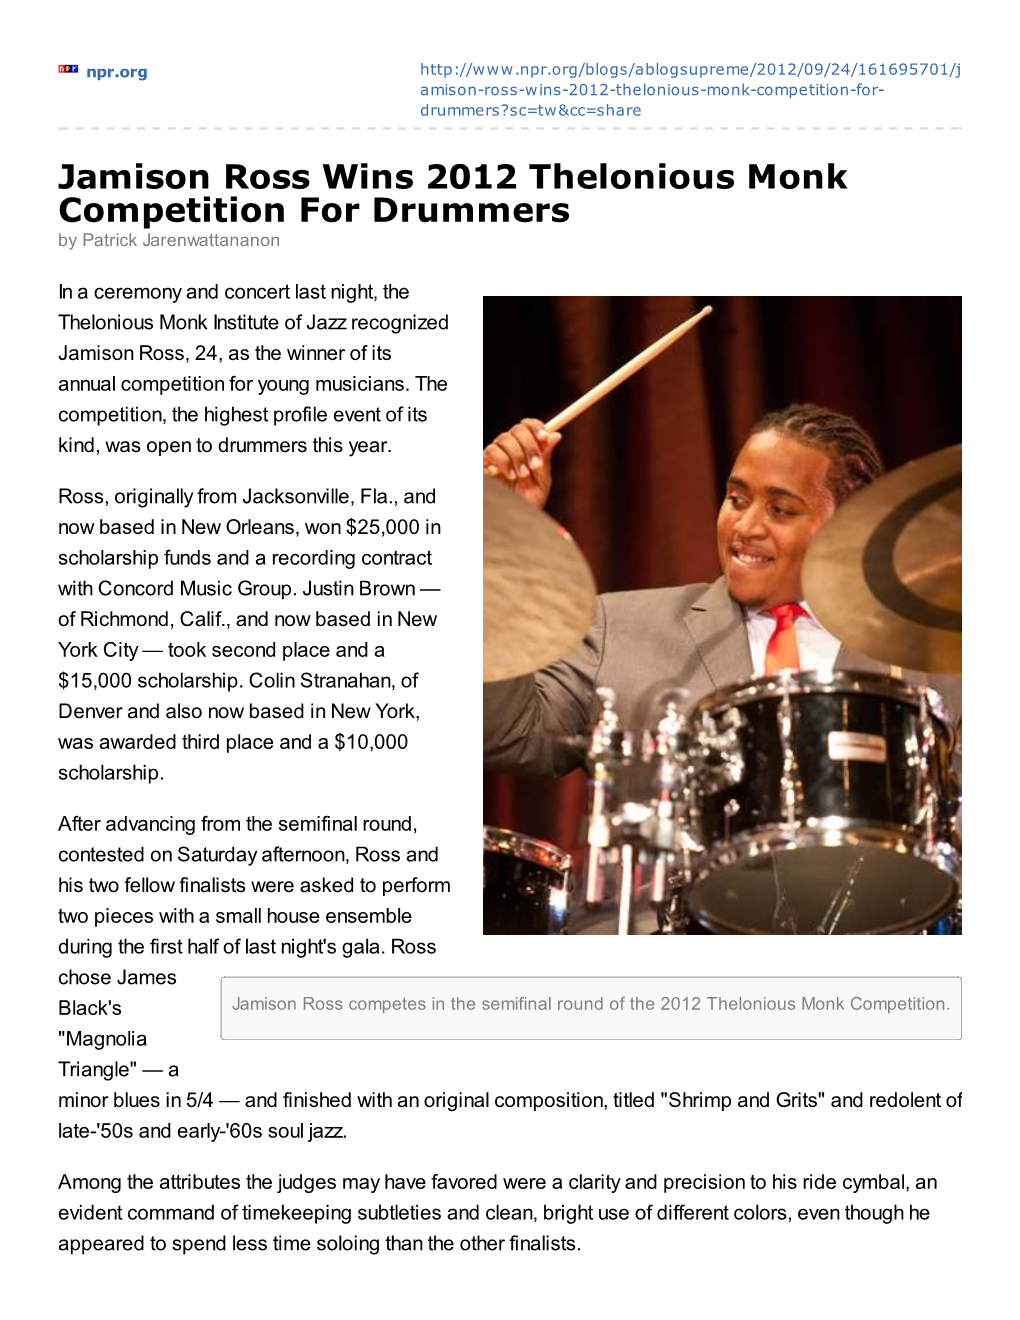 Jamison Ross Wins 2012 Thelonious Monk Competition for Drummers by Patrick Jarenwattananon